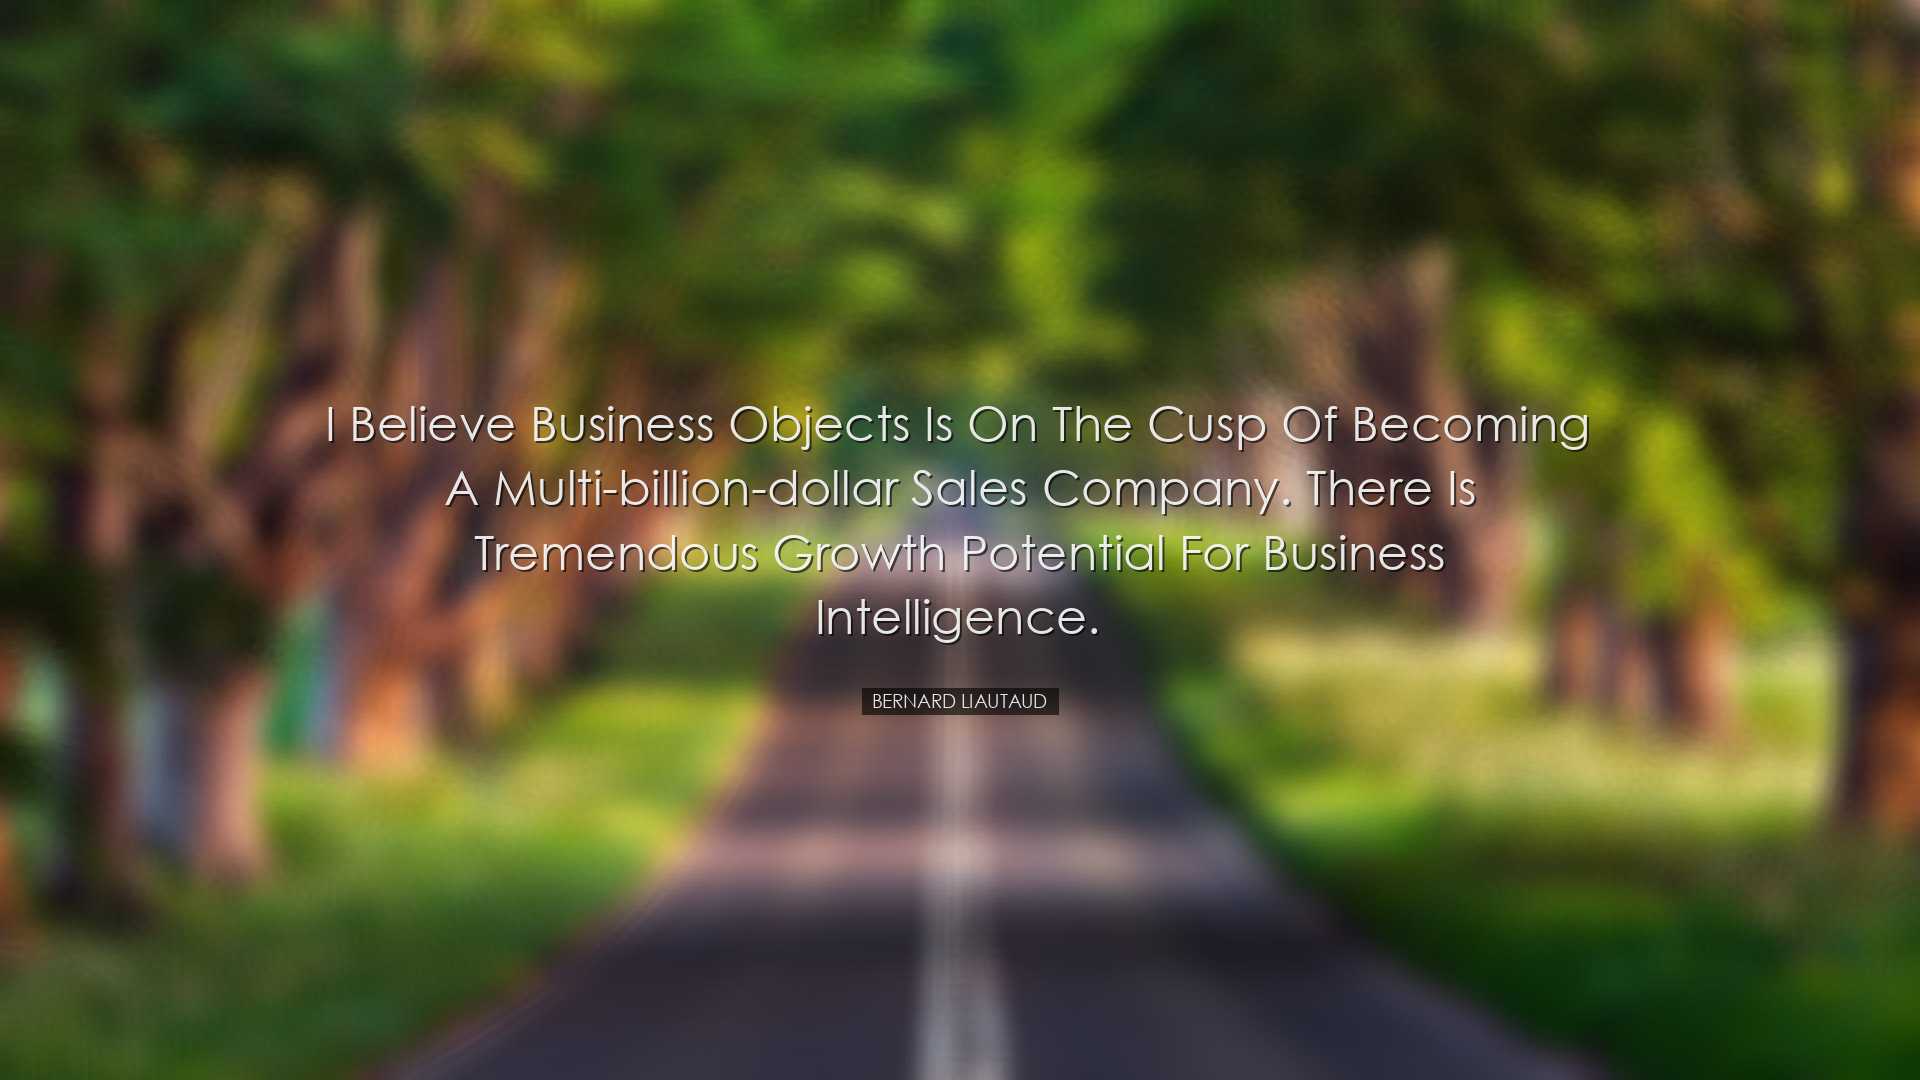 I believe Business Objects is on the cusp of becoming a multi-bill